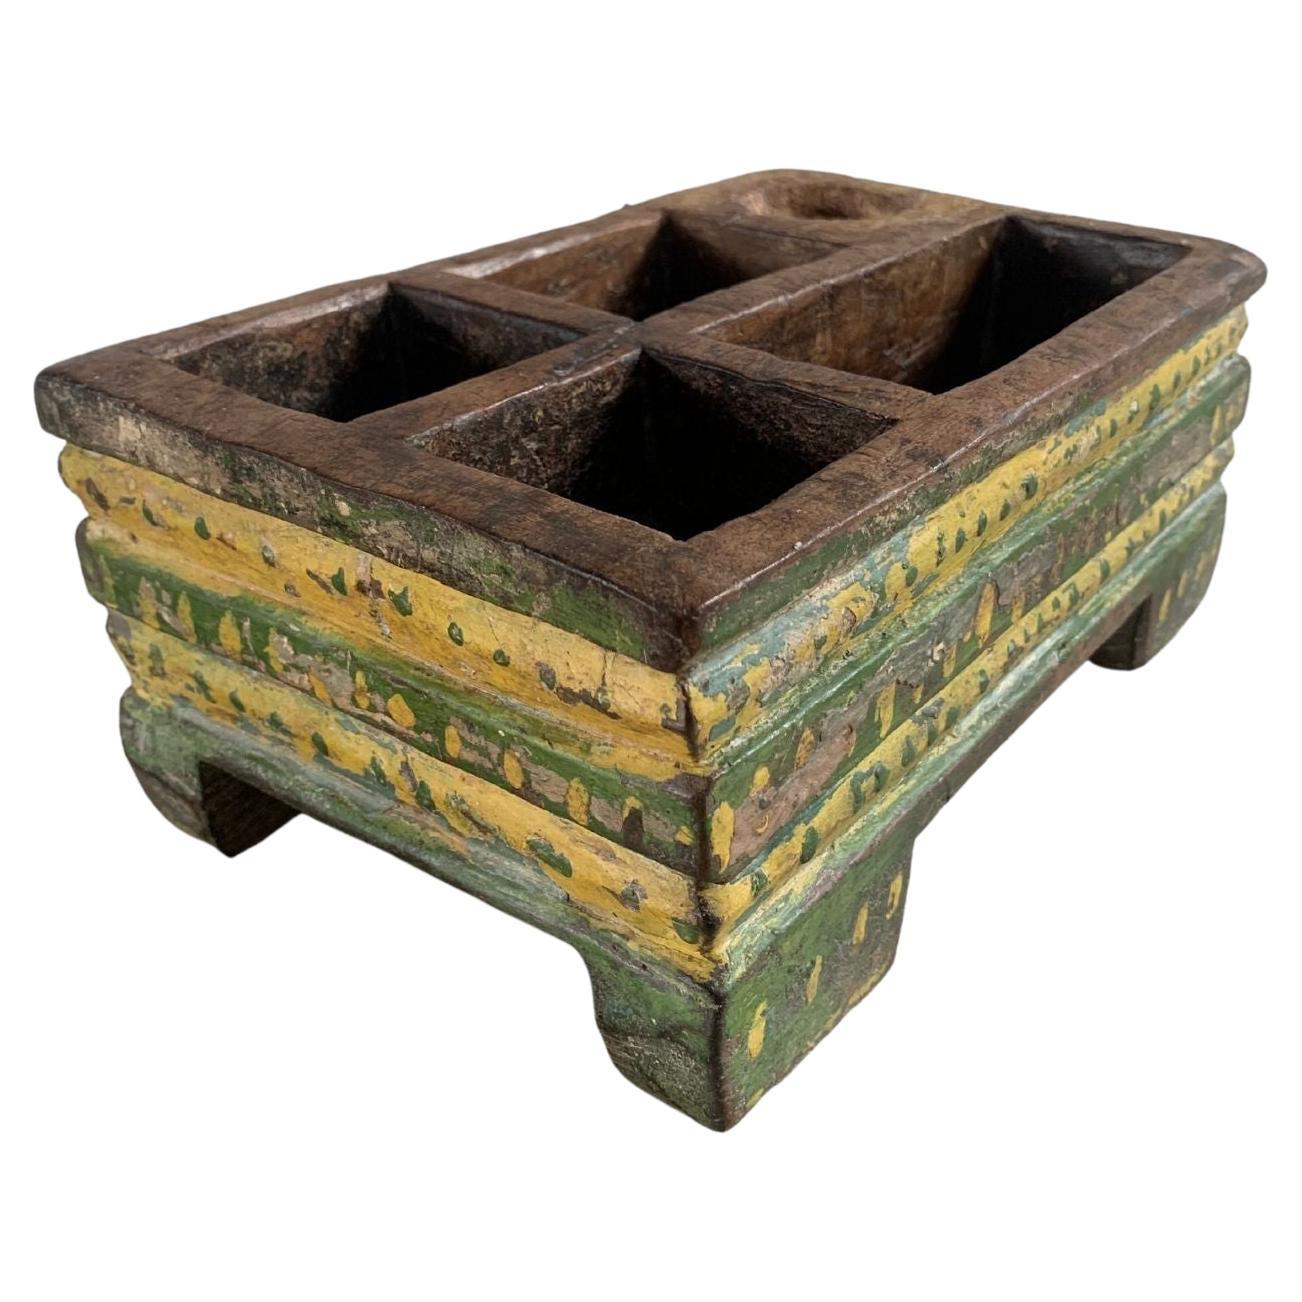 Betel Nut Box from Java with Polychromed Finish, Indonesia, c. 1900